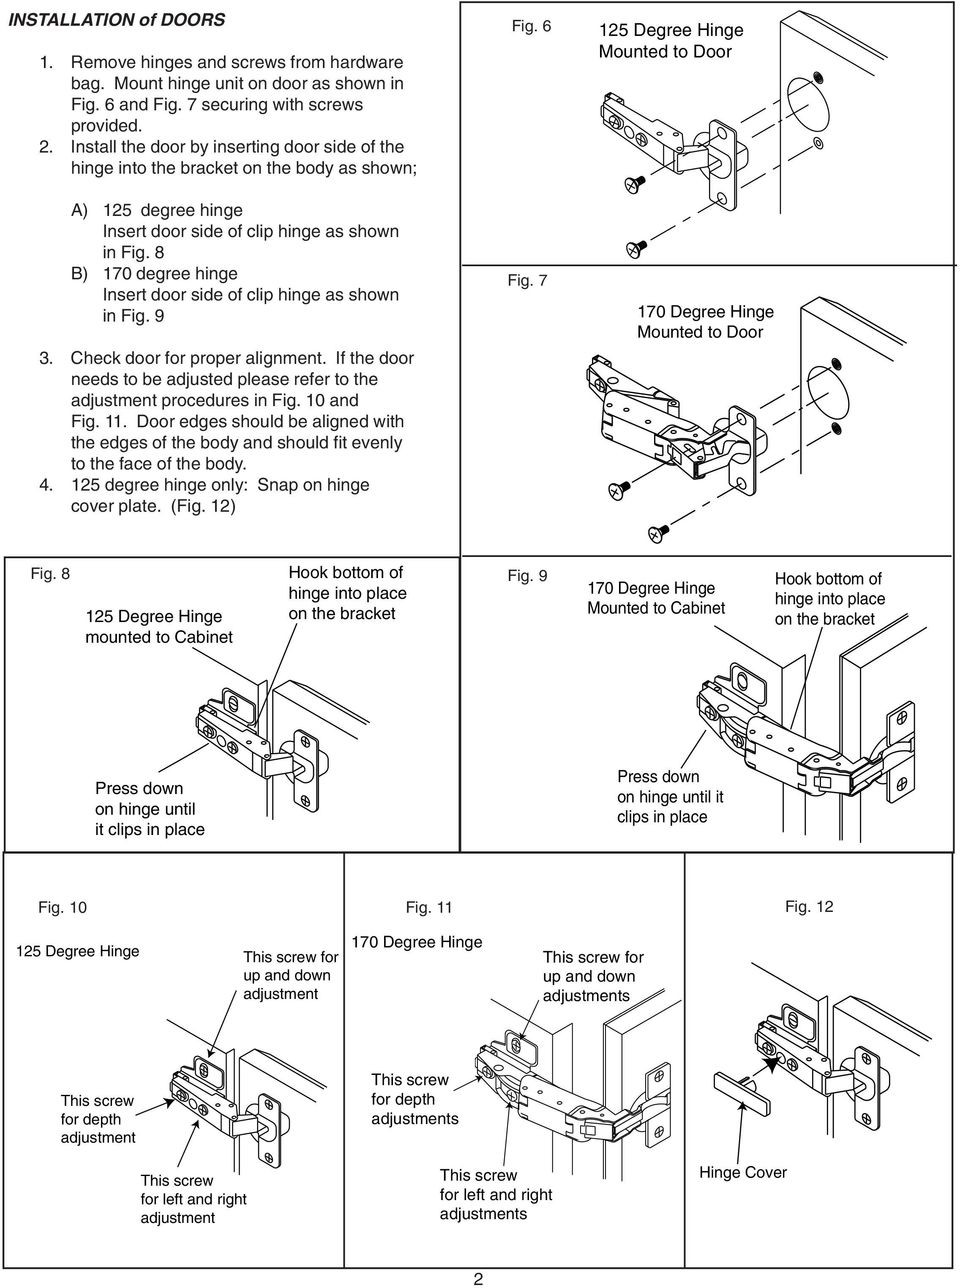 8 B) 170 degree hinge Insert door side of clip hinge as shown in Fig. 9. Check door for proper alignment. If the door needs to be adjusted please refer to the adjustment procedures in Fig. 10 and Fig.